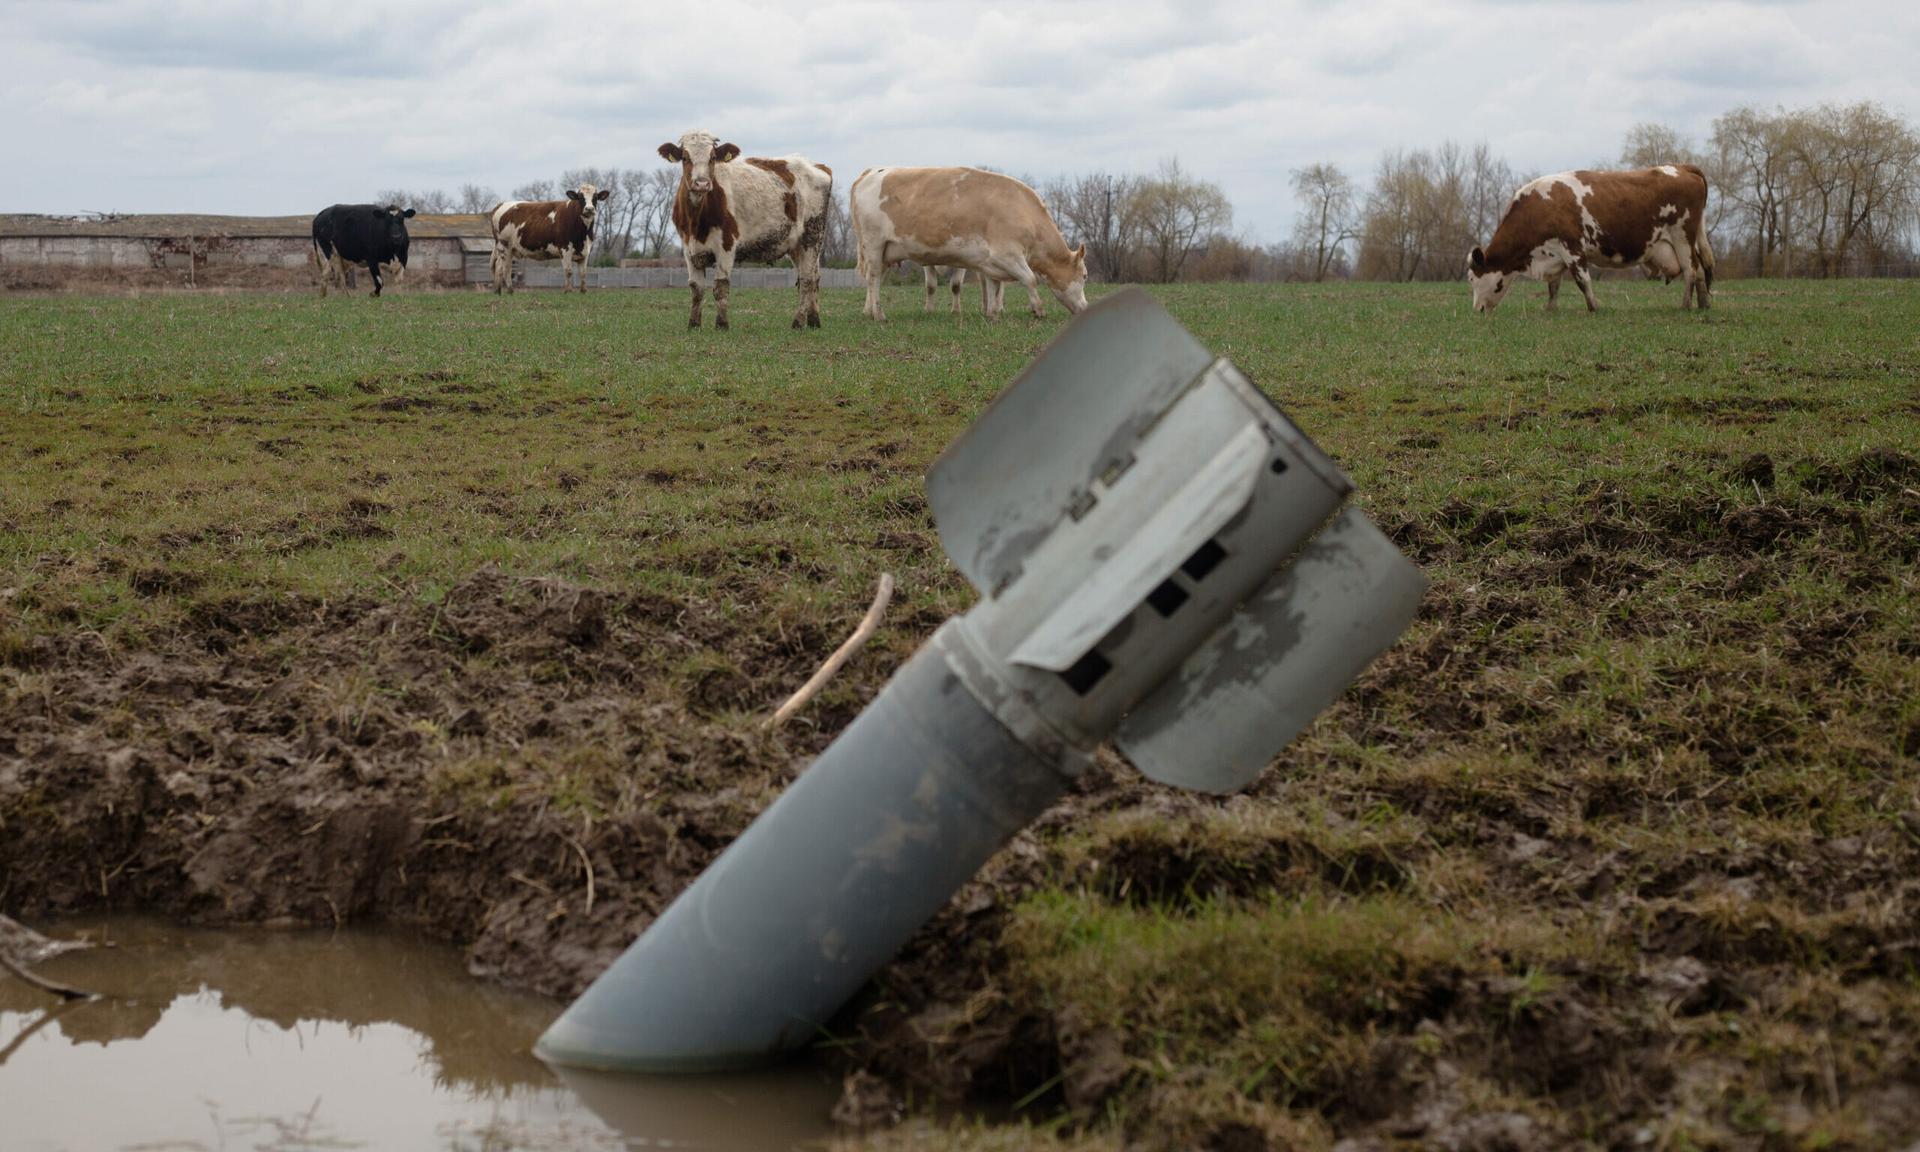 LUKASHIVKA, UKRAINE &#8211; APRIL 10: A rocket sits in a field near grazing cows on April 10, 2022 in Lukashivka village, Ukraine. The Russian retreat from Ukrainian towns and cities has revealed scores of civilian deaths and the full extent of devastation since the beginning of the Russian invasion. (Photo by Anastasia Vlasova/Getty Images)